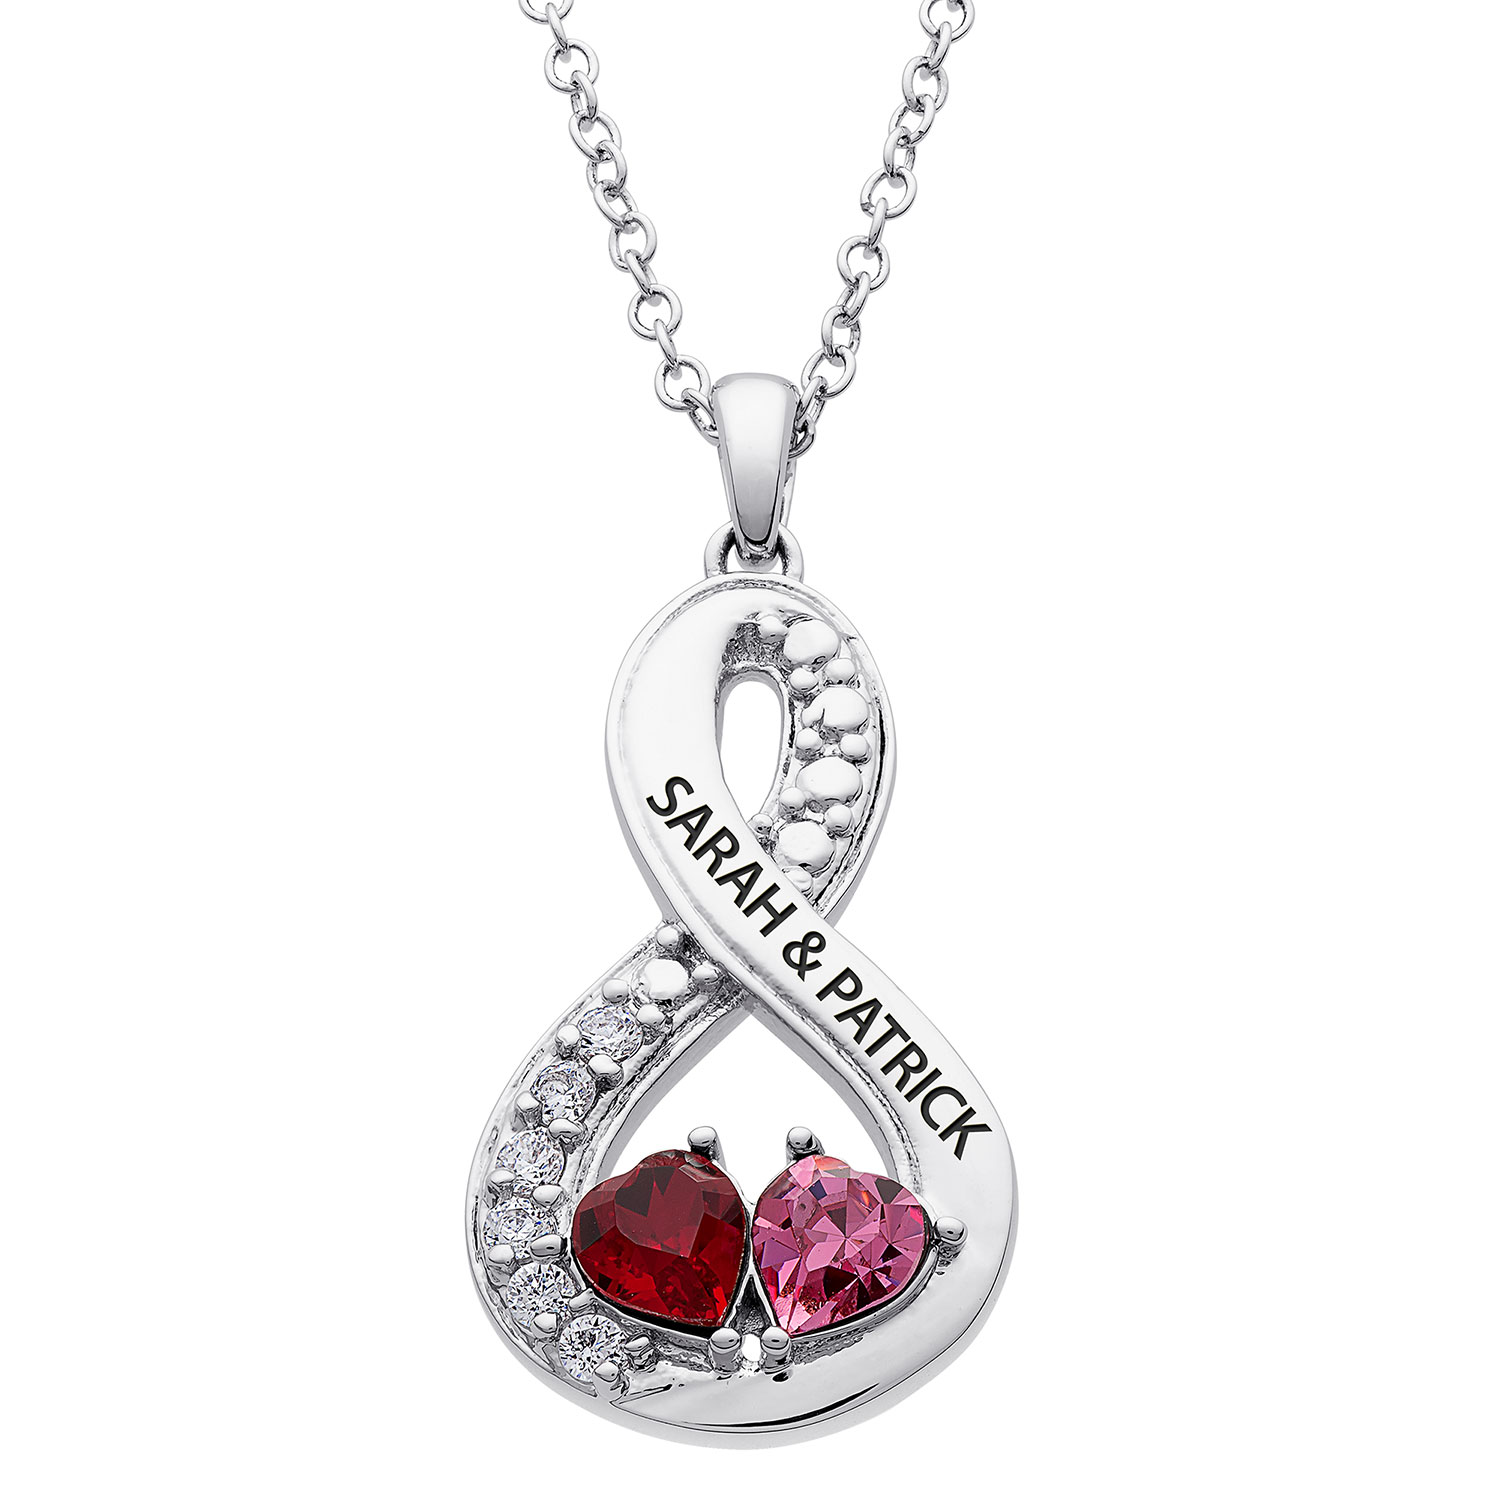 Silver Plated Couples Engraved Hearts Birthstone Eternity pendant